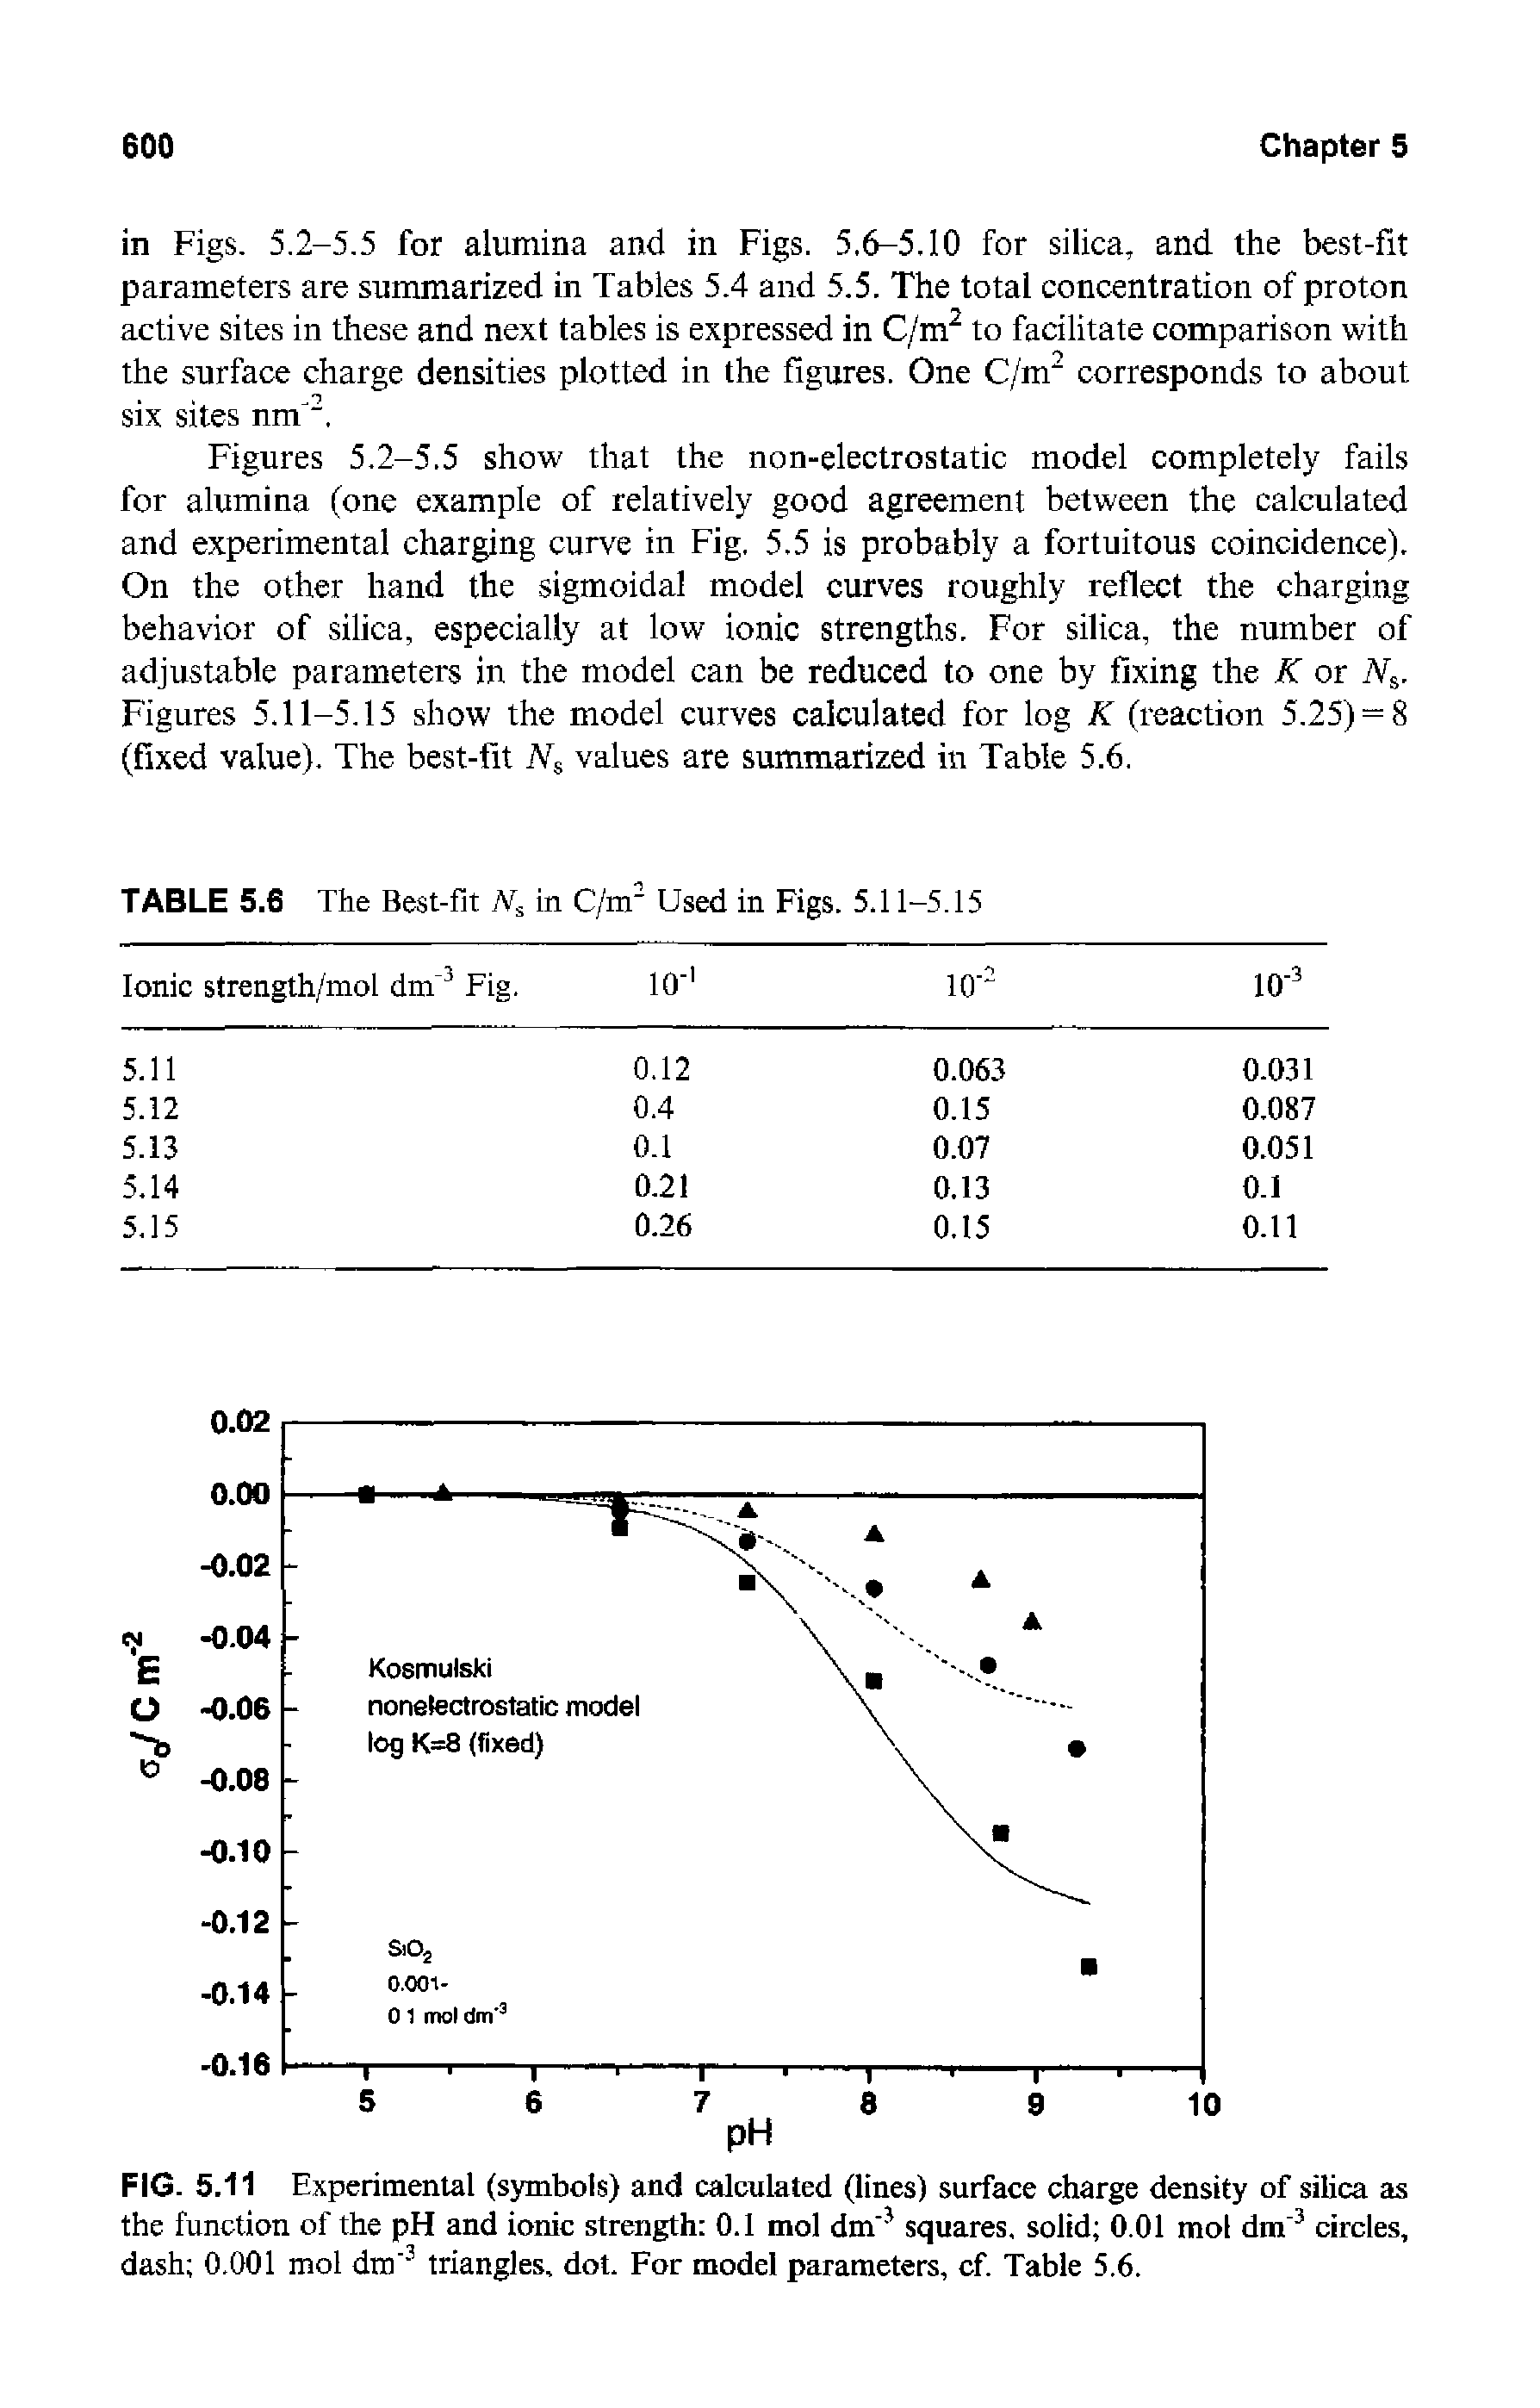 Figures 5.2-5.5 show that the non-electrostatic model completely fails for alumina (one example of relatively good agreement between the calculated and experimental charging curve in Fig, 5.5 is probably a fortuitous coincidence). On the other hand the sigmoidal model curves roughly reflect the charging behavior of silica, especially at low ionic strengths. For silica, the number of adjustable parameters in the model can be reduced to one by fixing the K or N, . Figures 5.11-5.15 show the model curves calculated for log K (reaction 5.25) = 8 (fixed value). The best-fit values are summarized in Table 5.6.